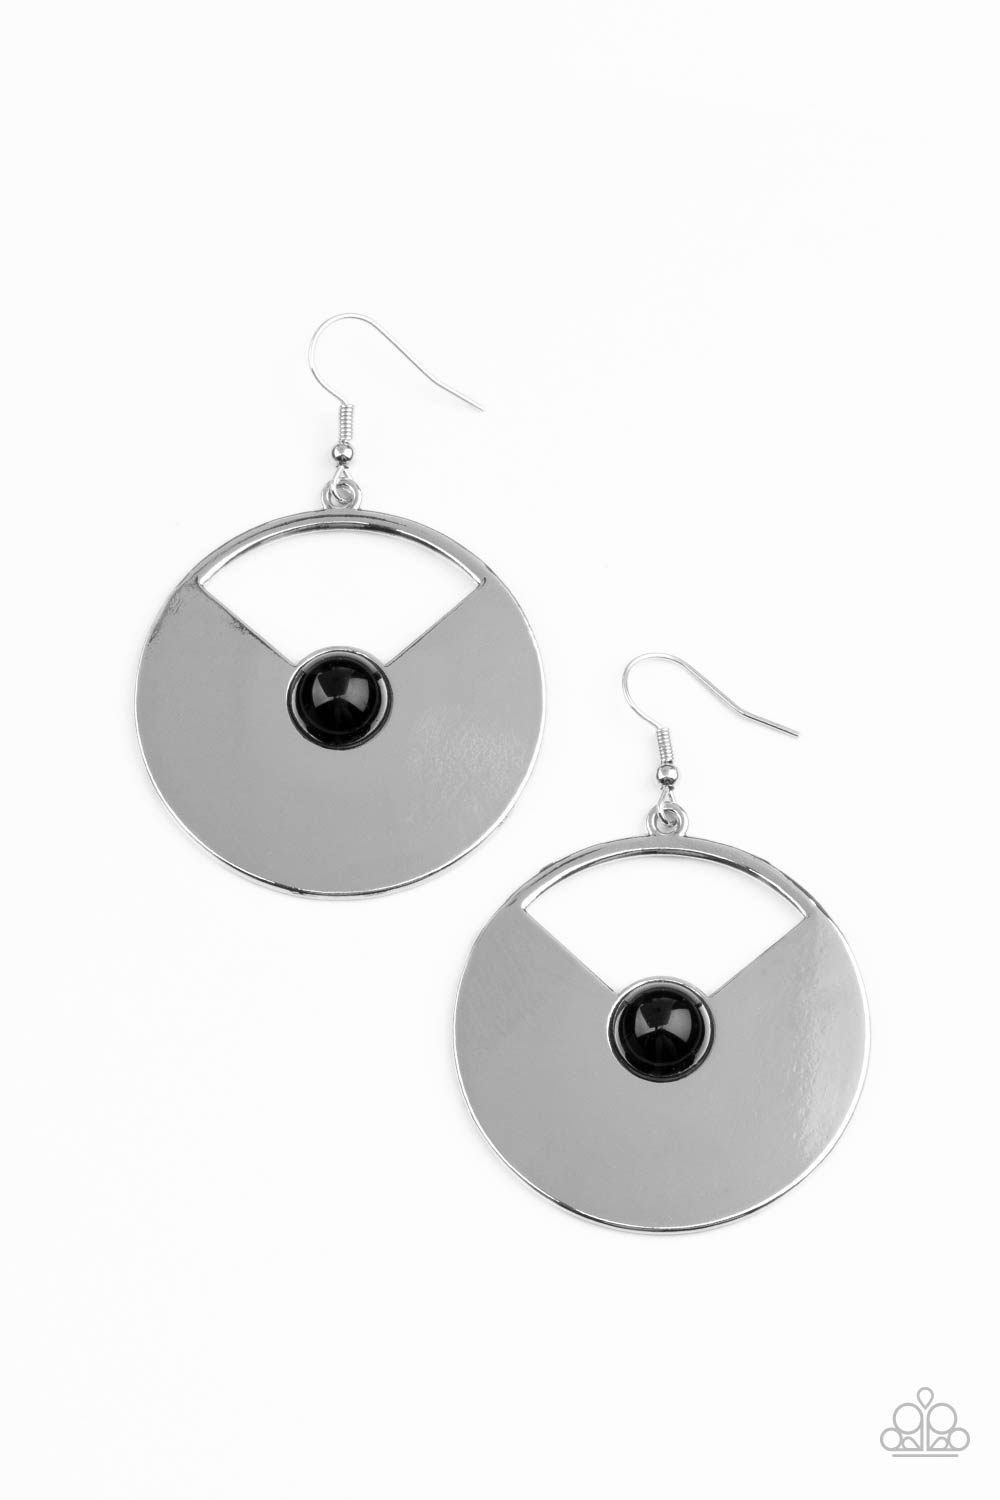 Paparazzi Accessories Record-Breaking Brilliance - Black Fishhook Earrings dotted with a black bead center, a slice of metal has been removed from an oversized silver disc for a retro effect. Earring attaches to a standard fishhook fitting.